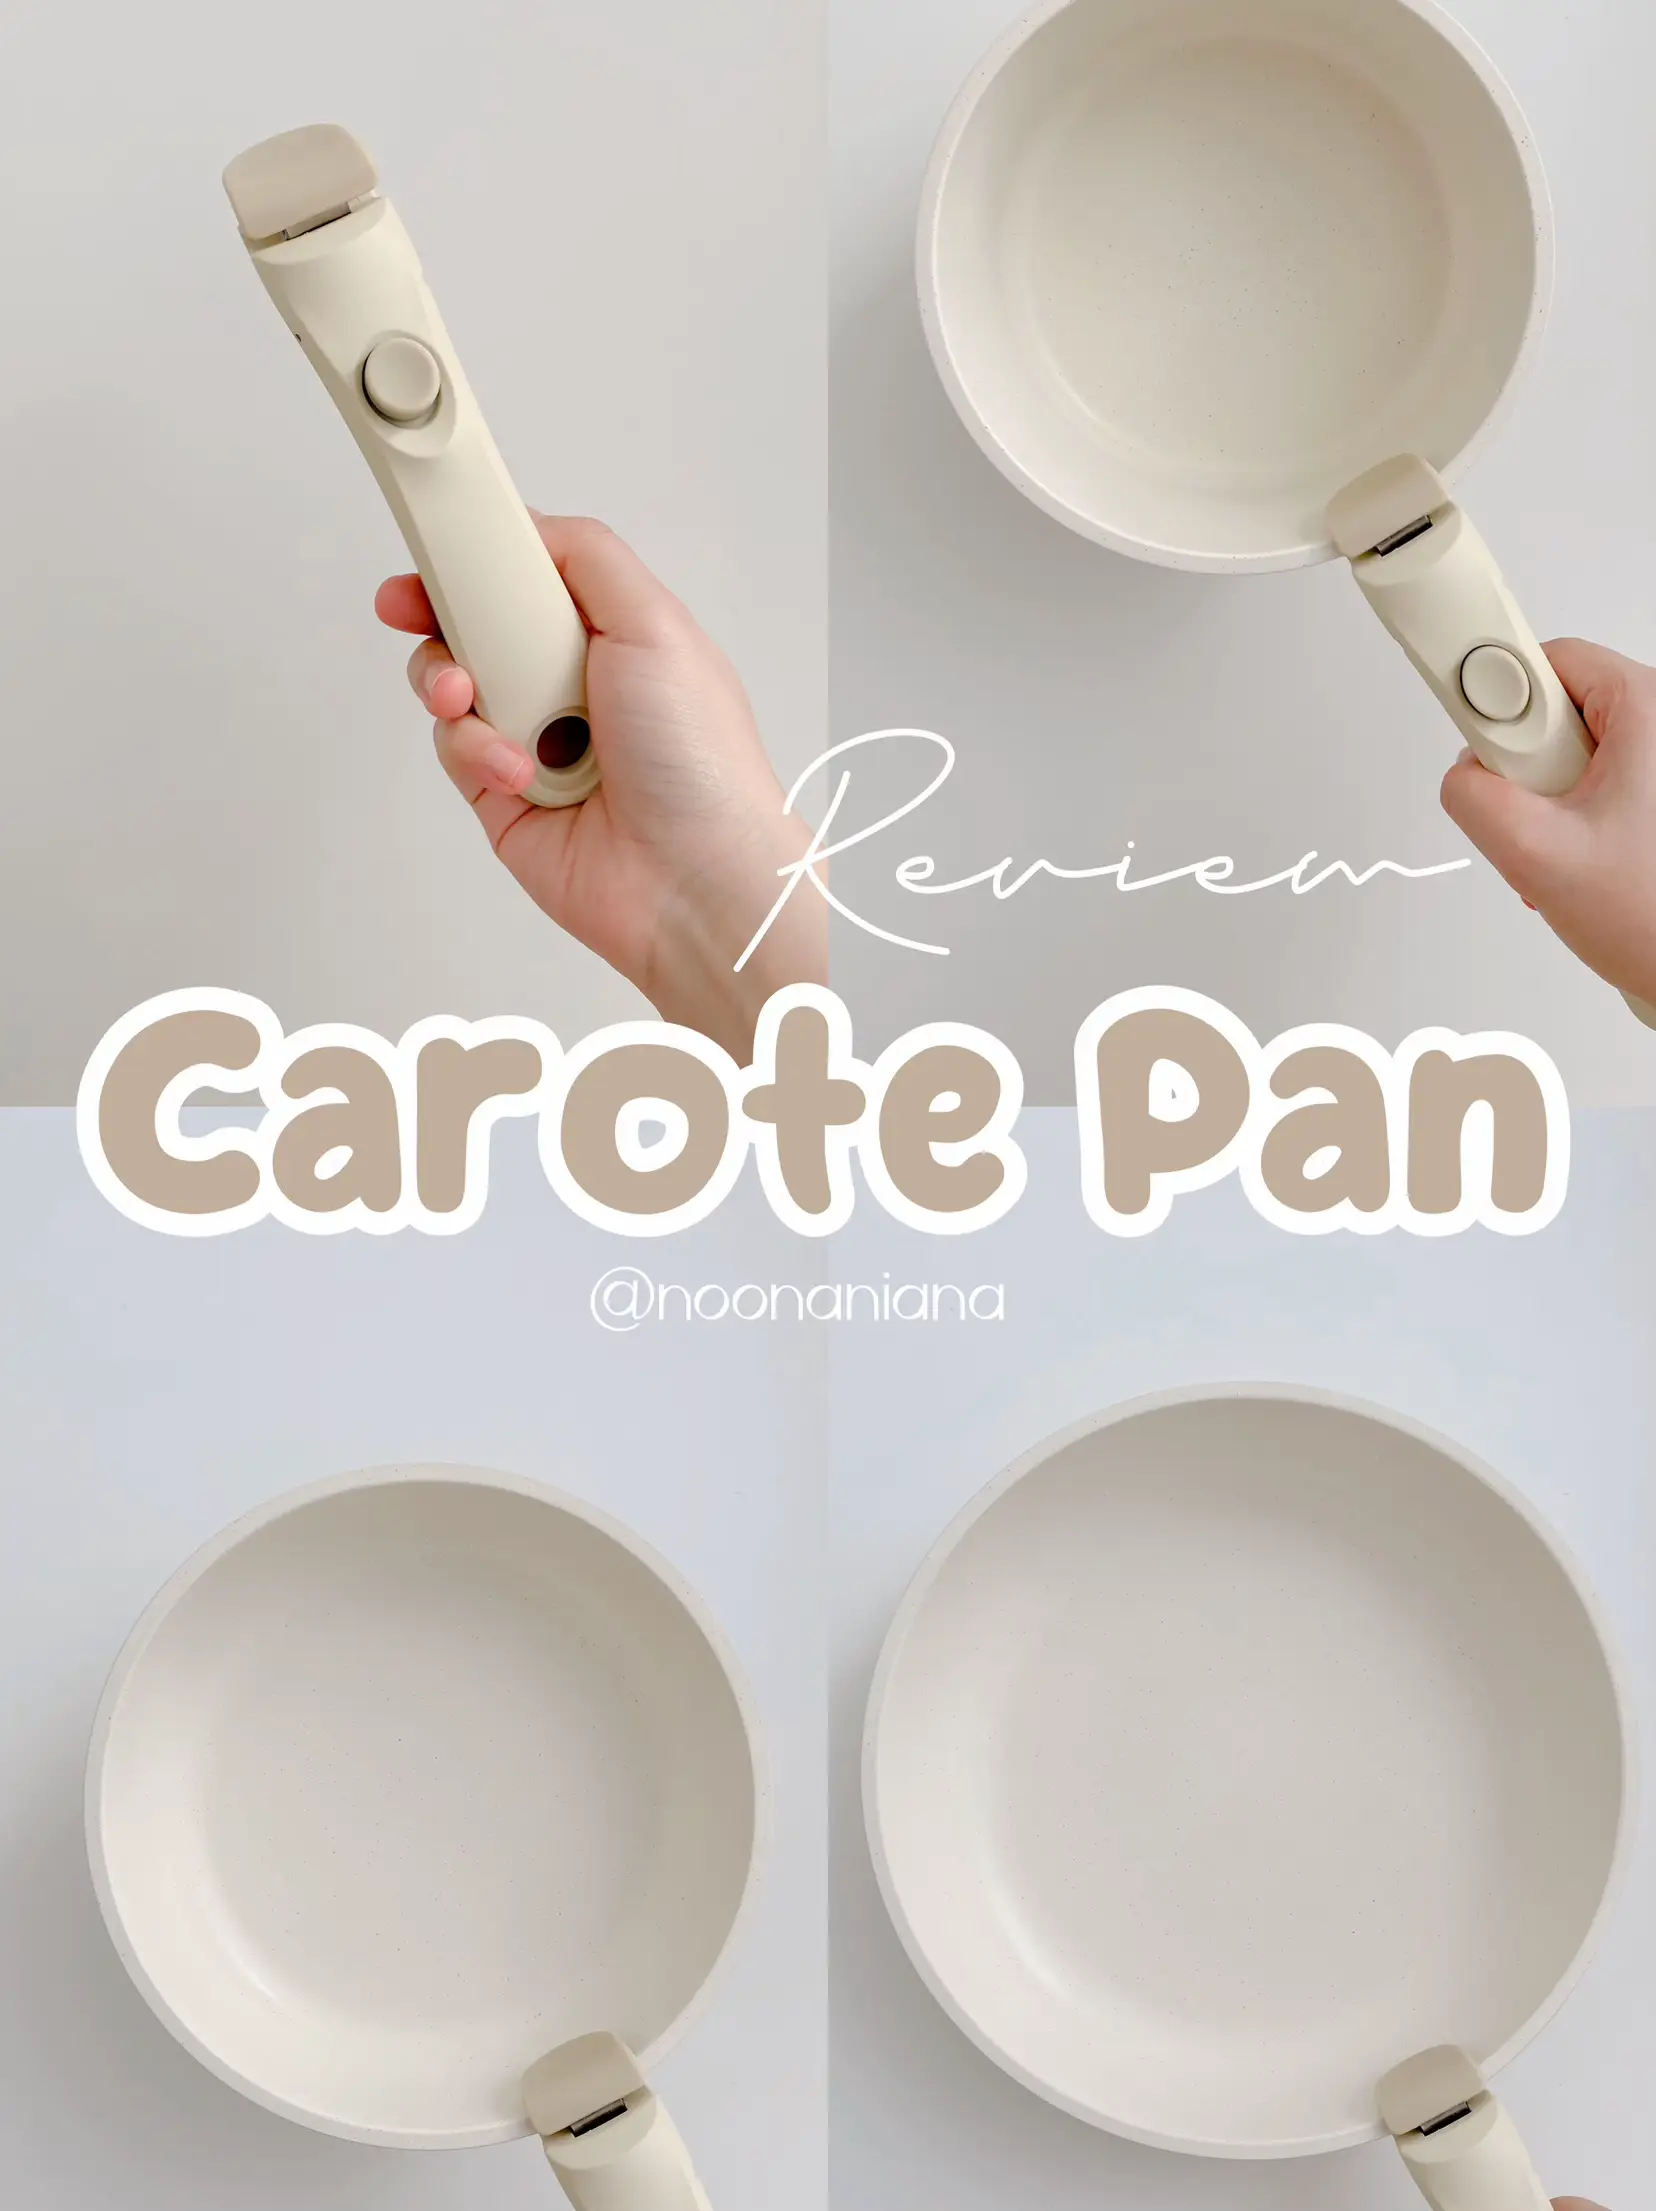 CAROTE Nonstick Frying Pan Skillet Review: Are They Any Good? 